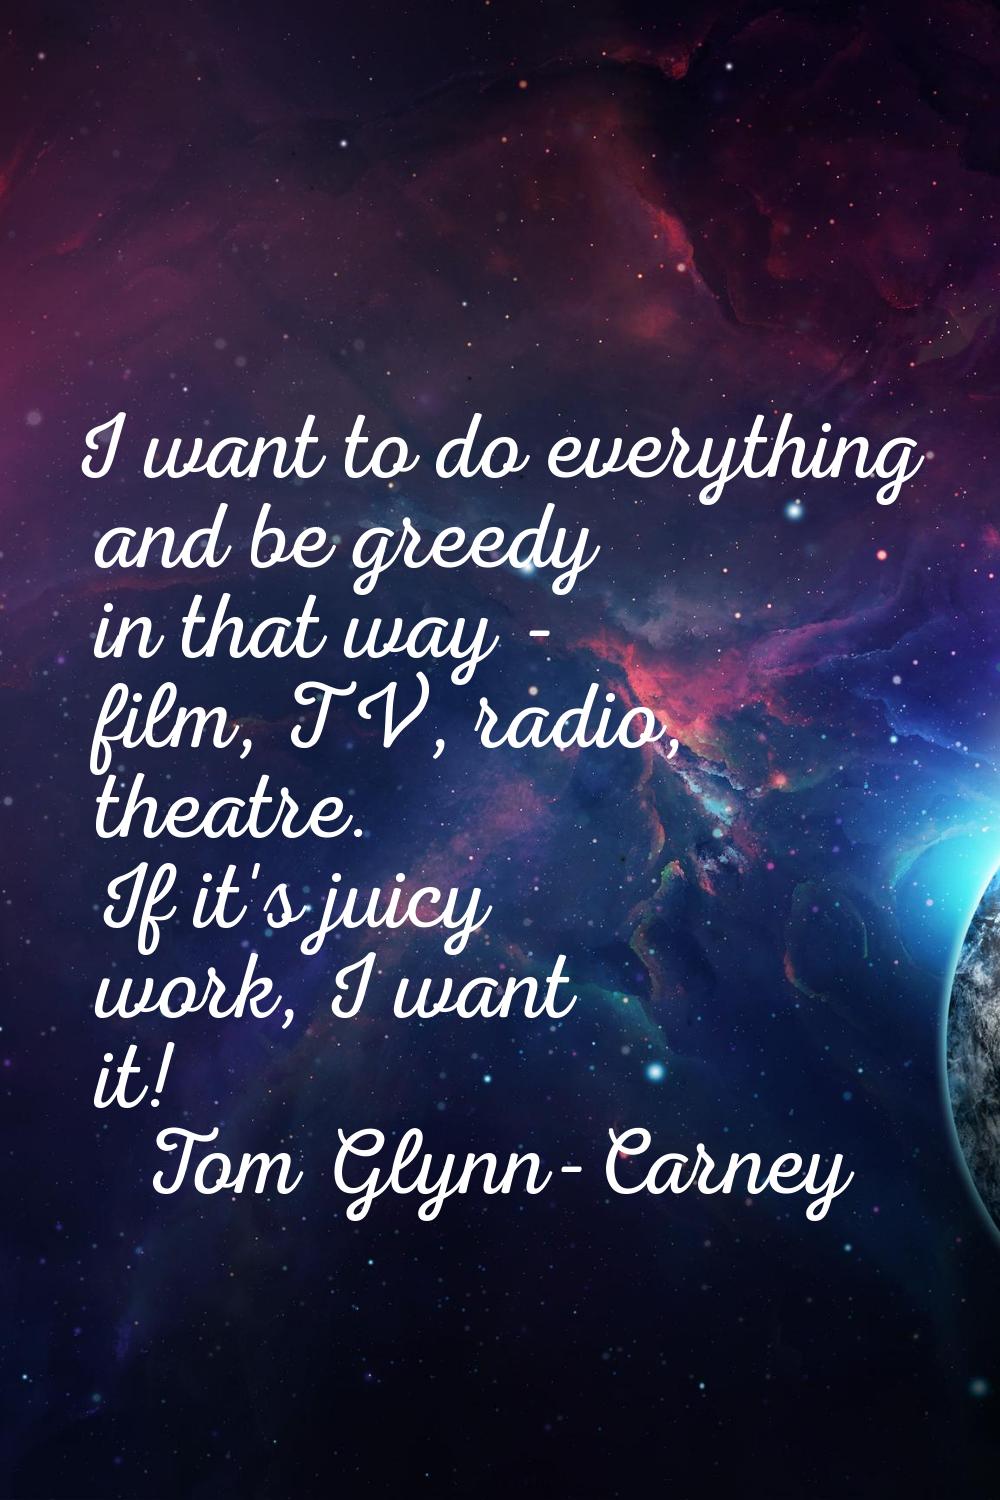 I want to do everything and be greedy in that way - film, TV, radio, theatre. If it's juicy work, I